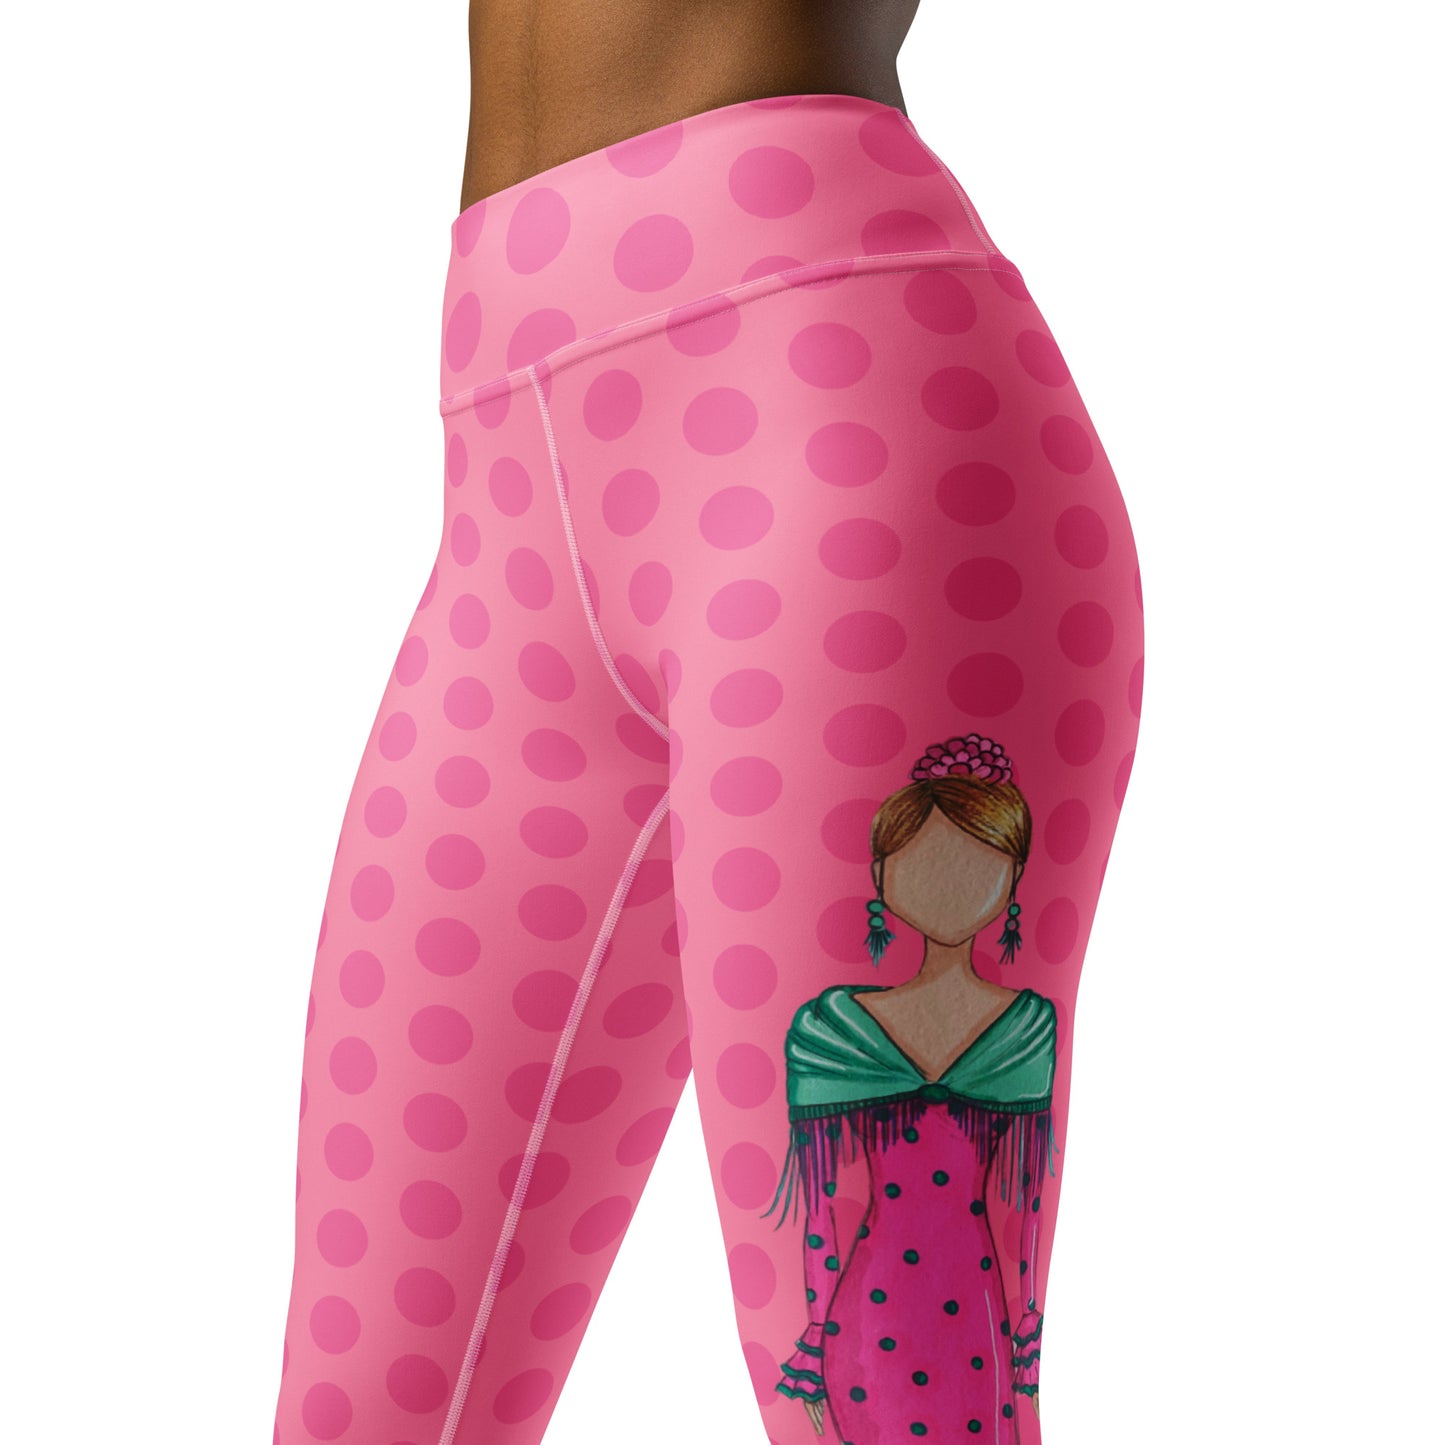 Flamenco Dancer Leggings, pink with pink polka dots high waisted yoga leggings with a pink dress and green shawl design - IllustrArte